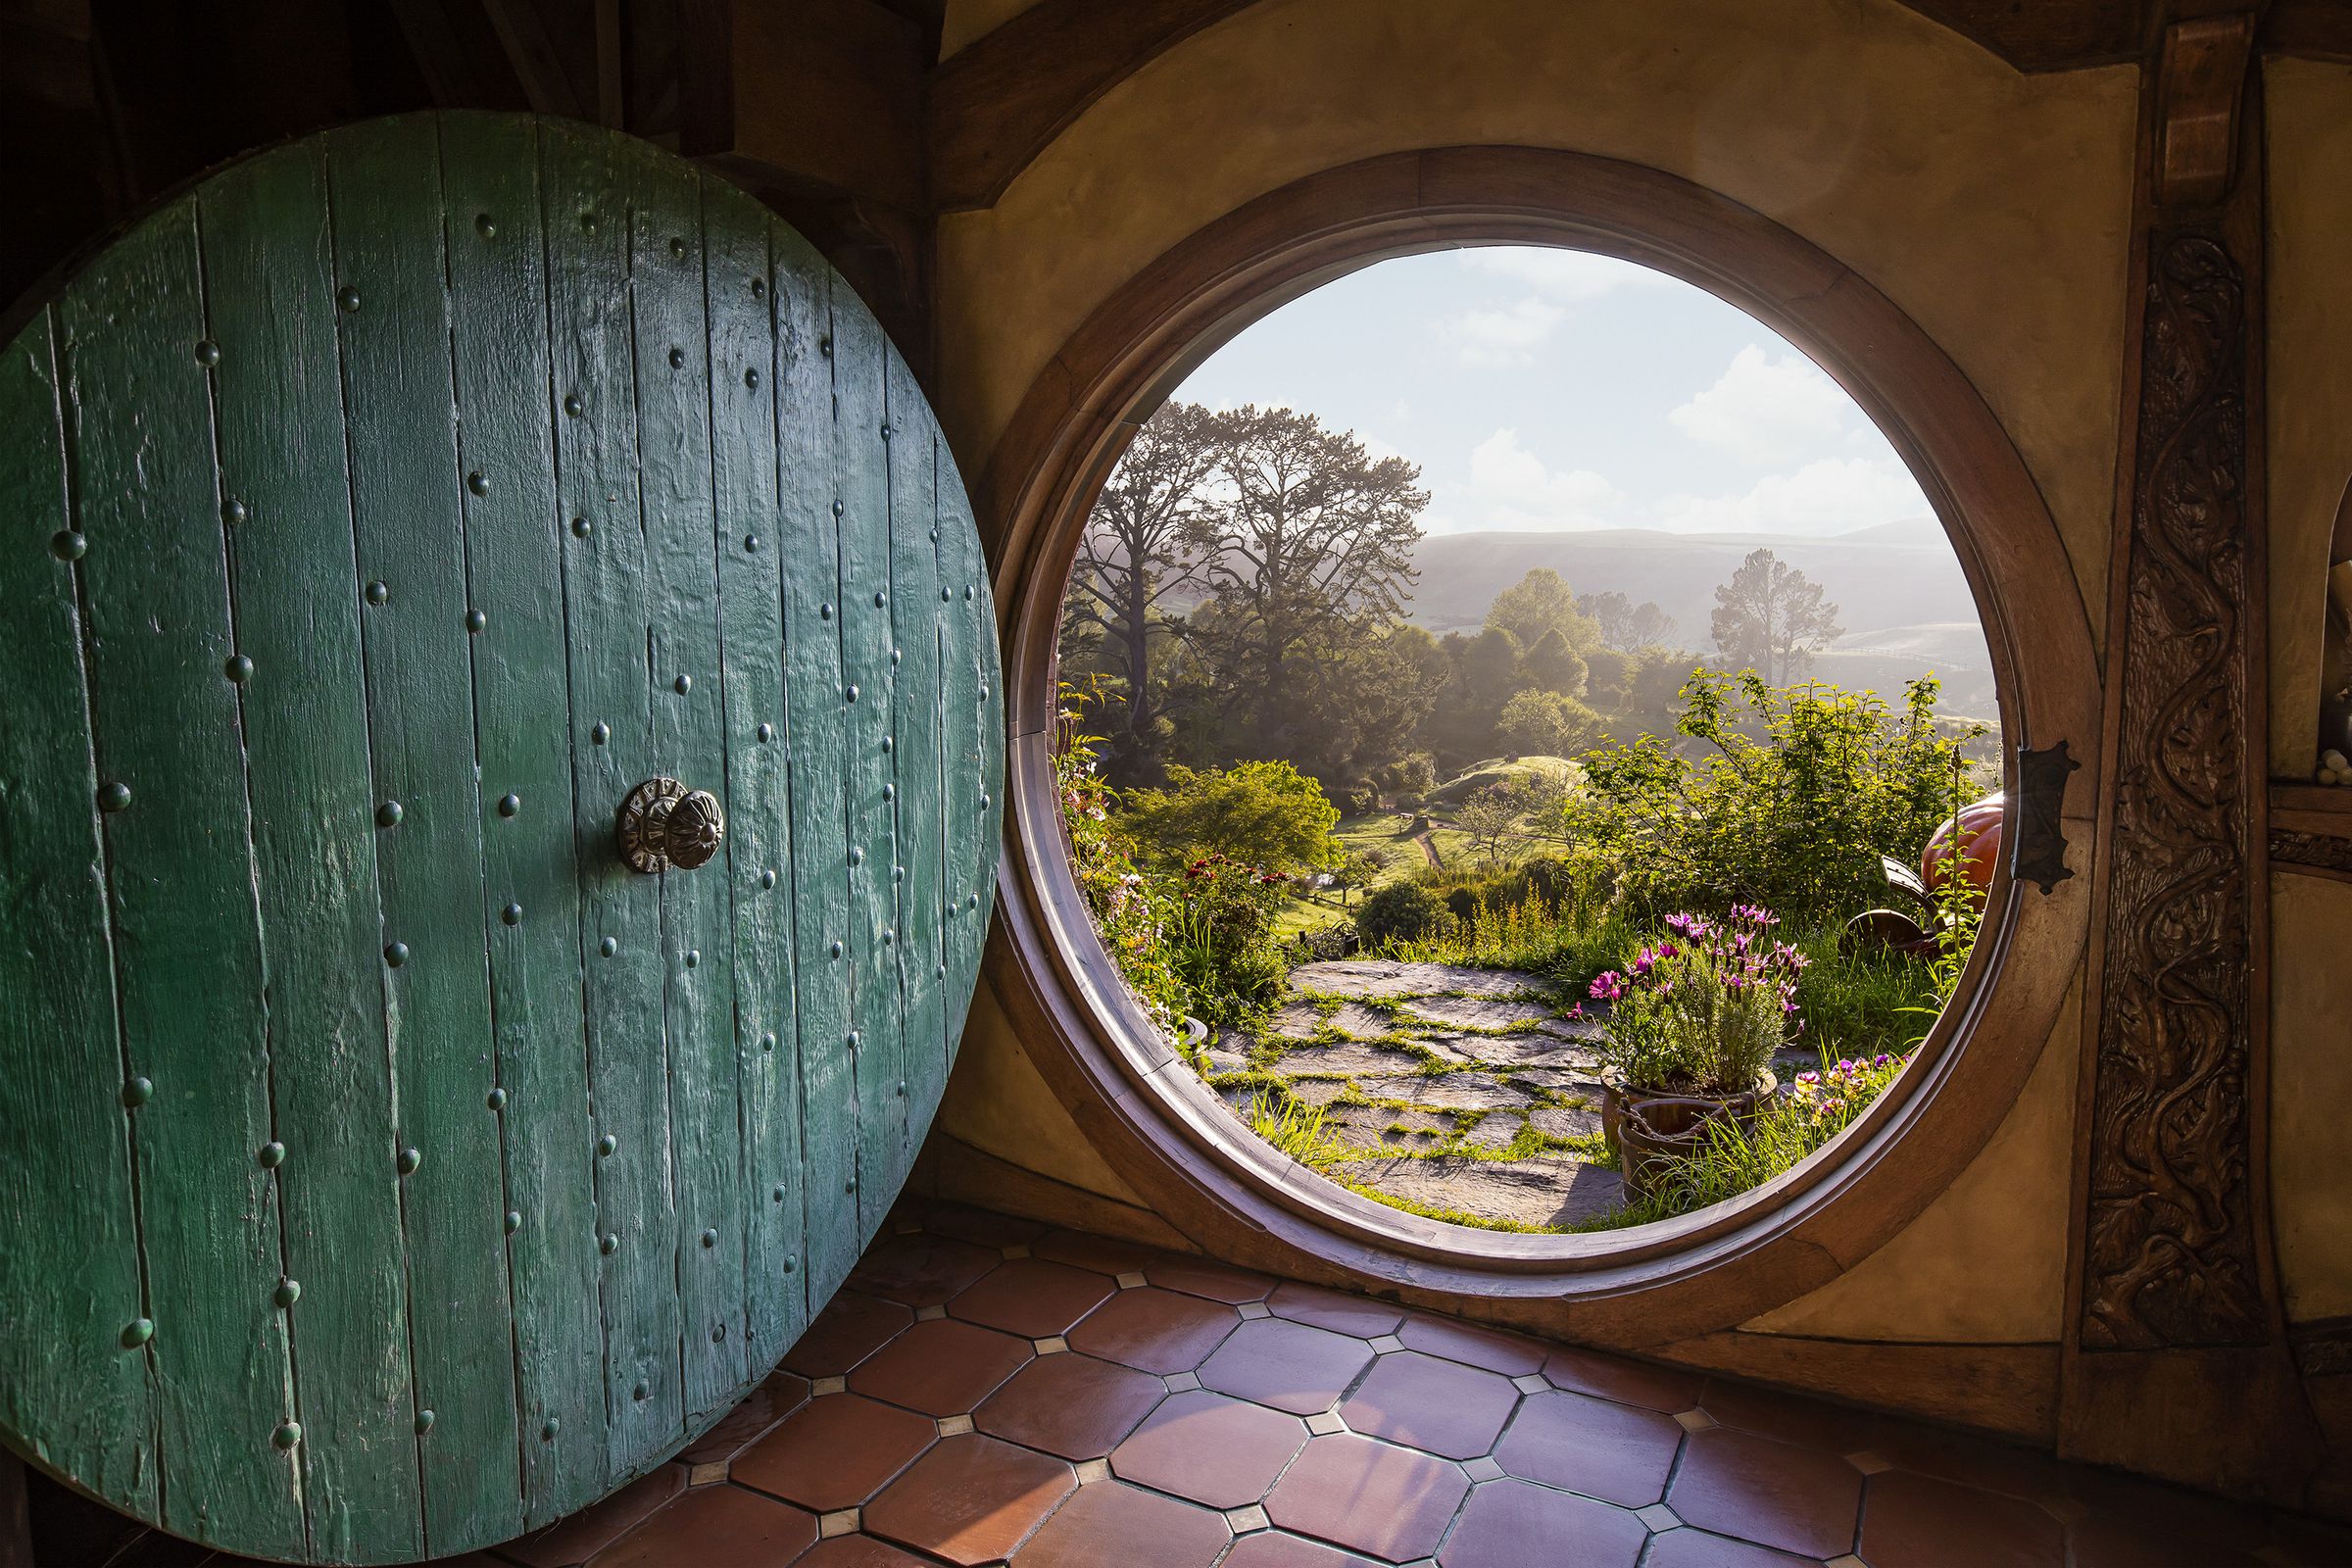 A circular Hobbit door open to reveal a green landscape that resembles The Shire from J.R.R.Tolkiens Middle Earth.